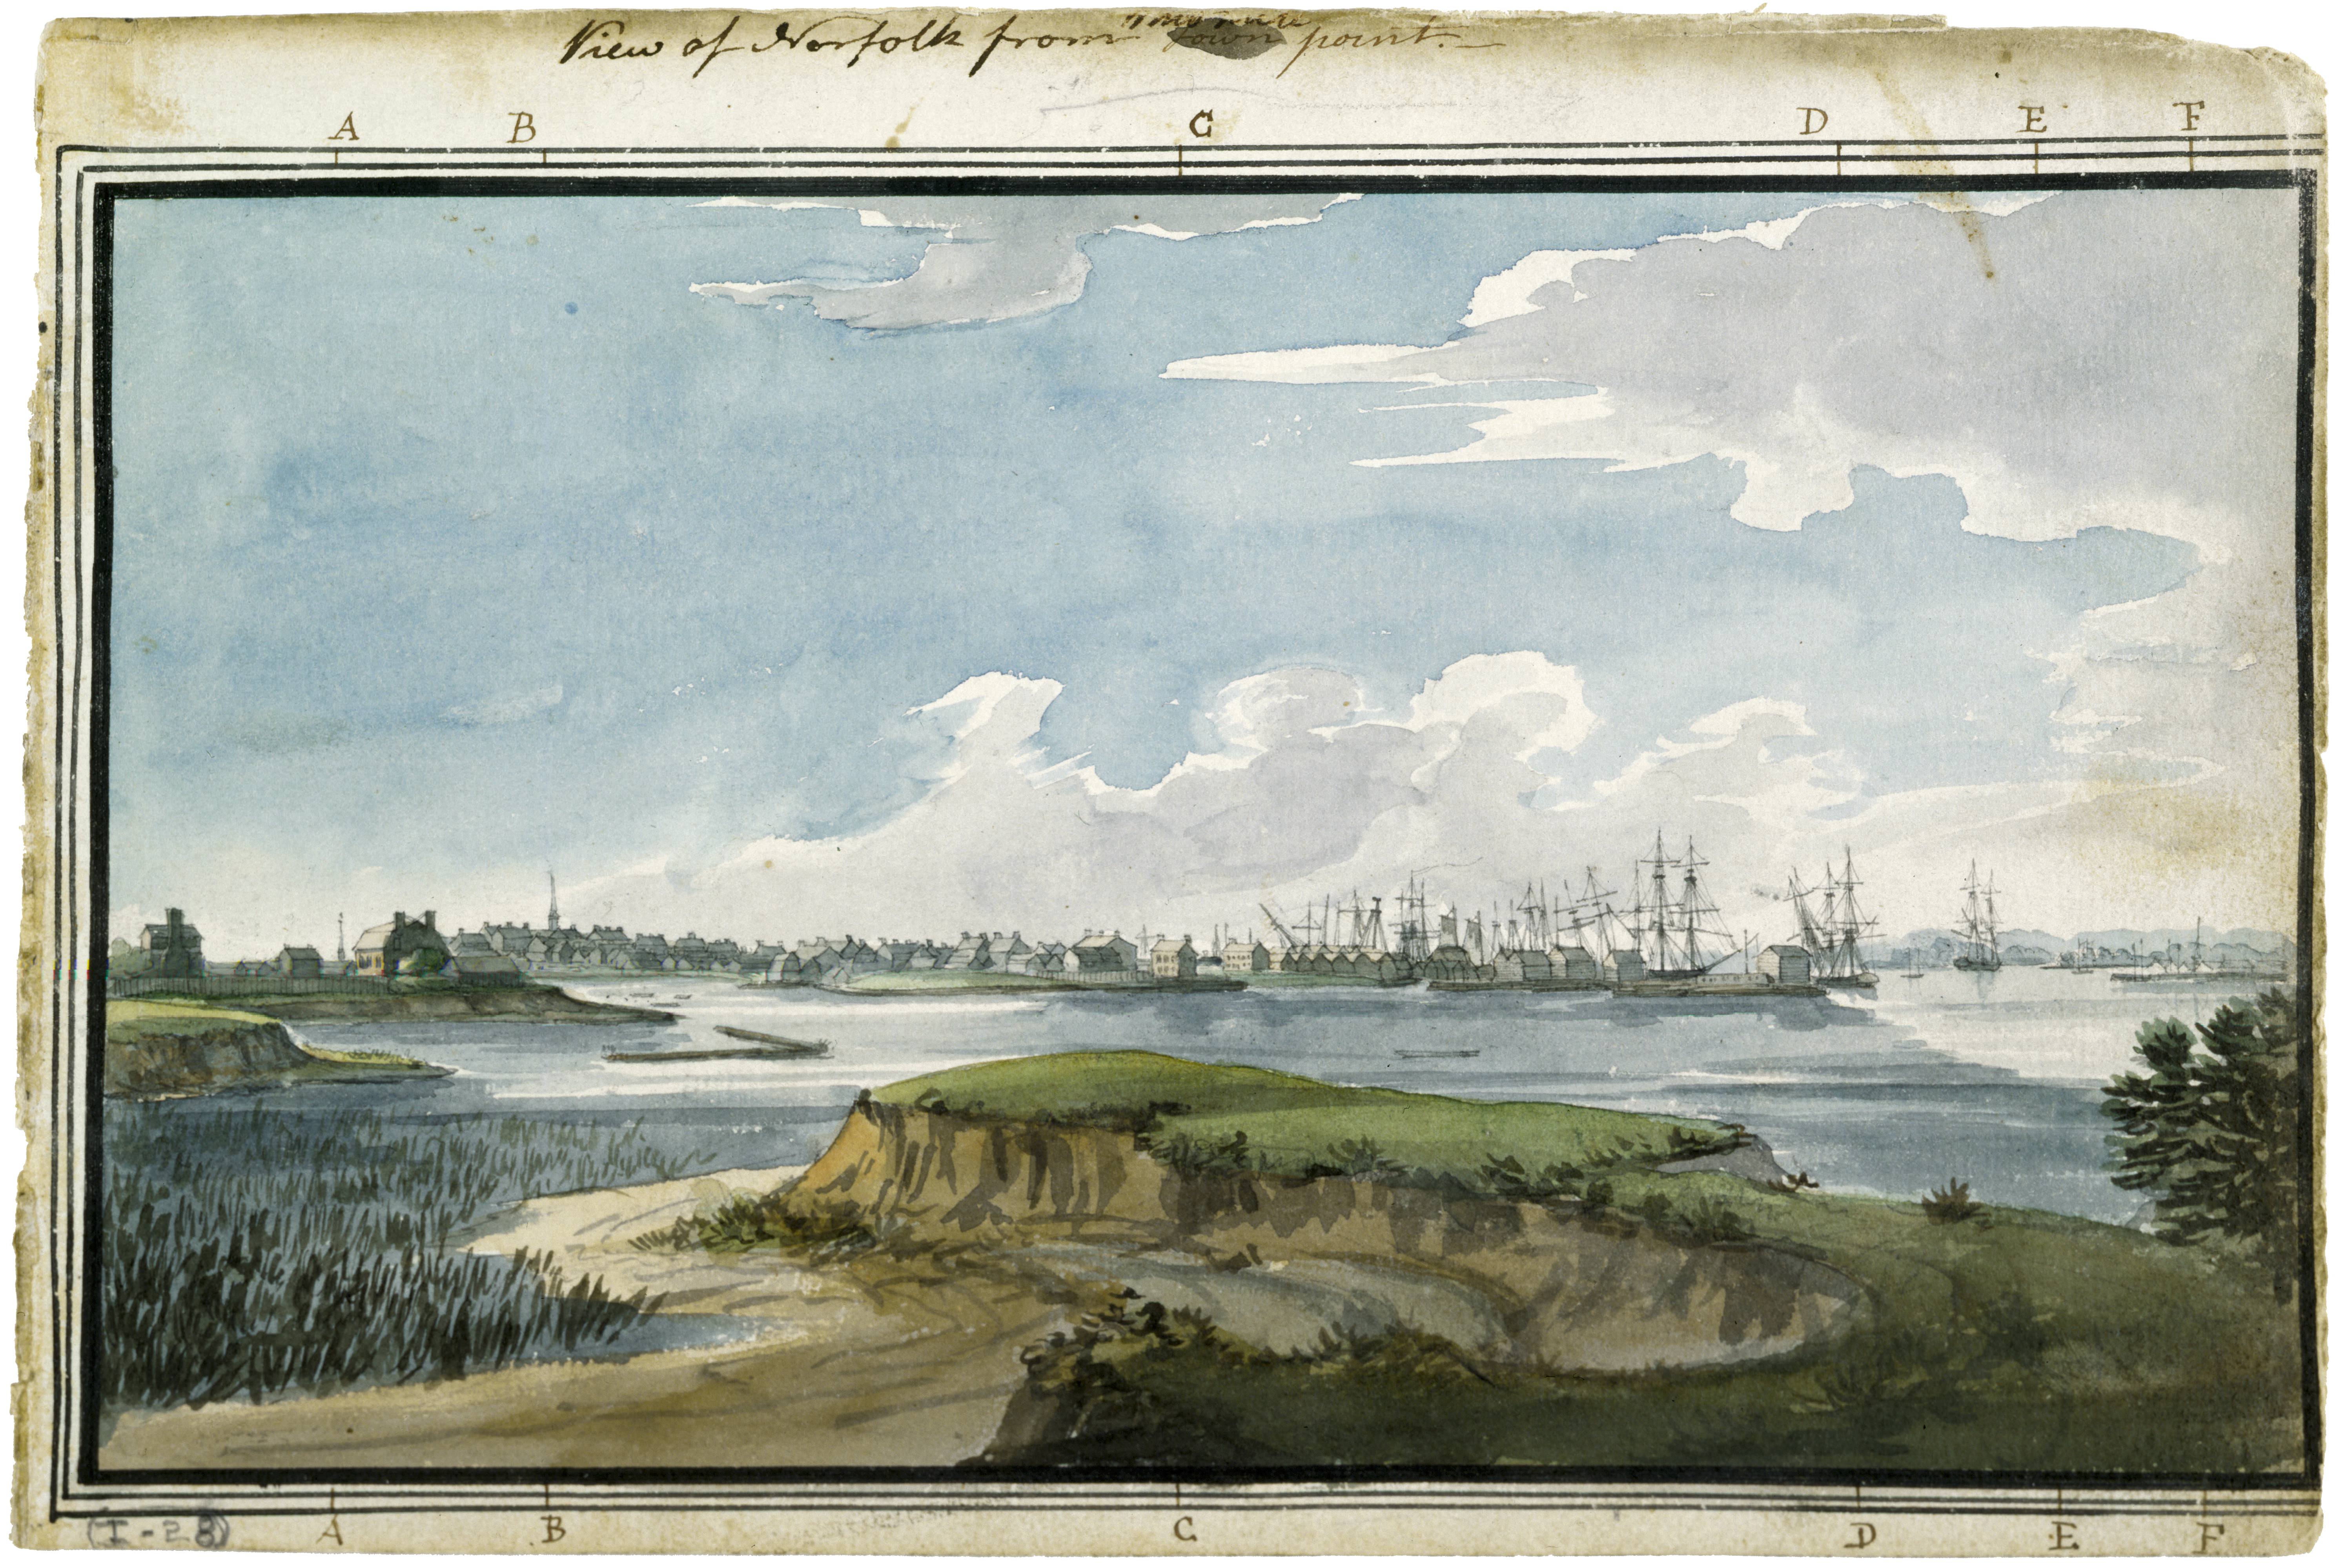 1796–98. watercolour, 17.7 × 26.6 cm. Collection of Maryland Historical Society (1960-108-1-1-28).